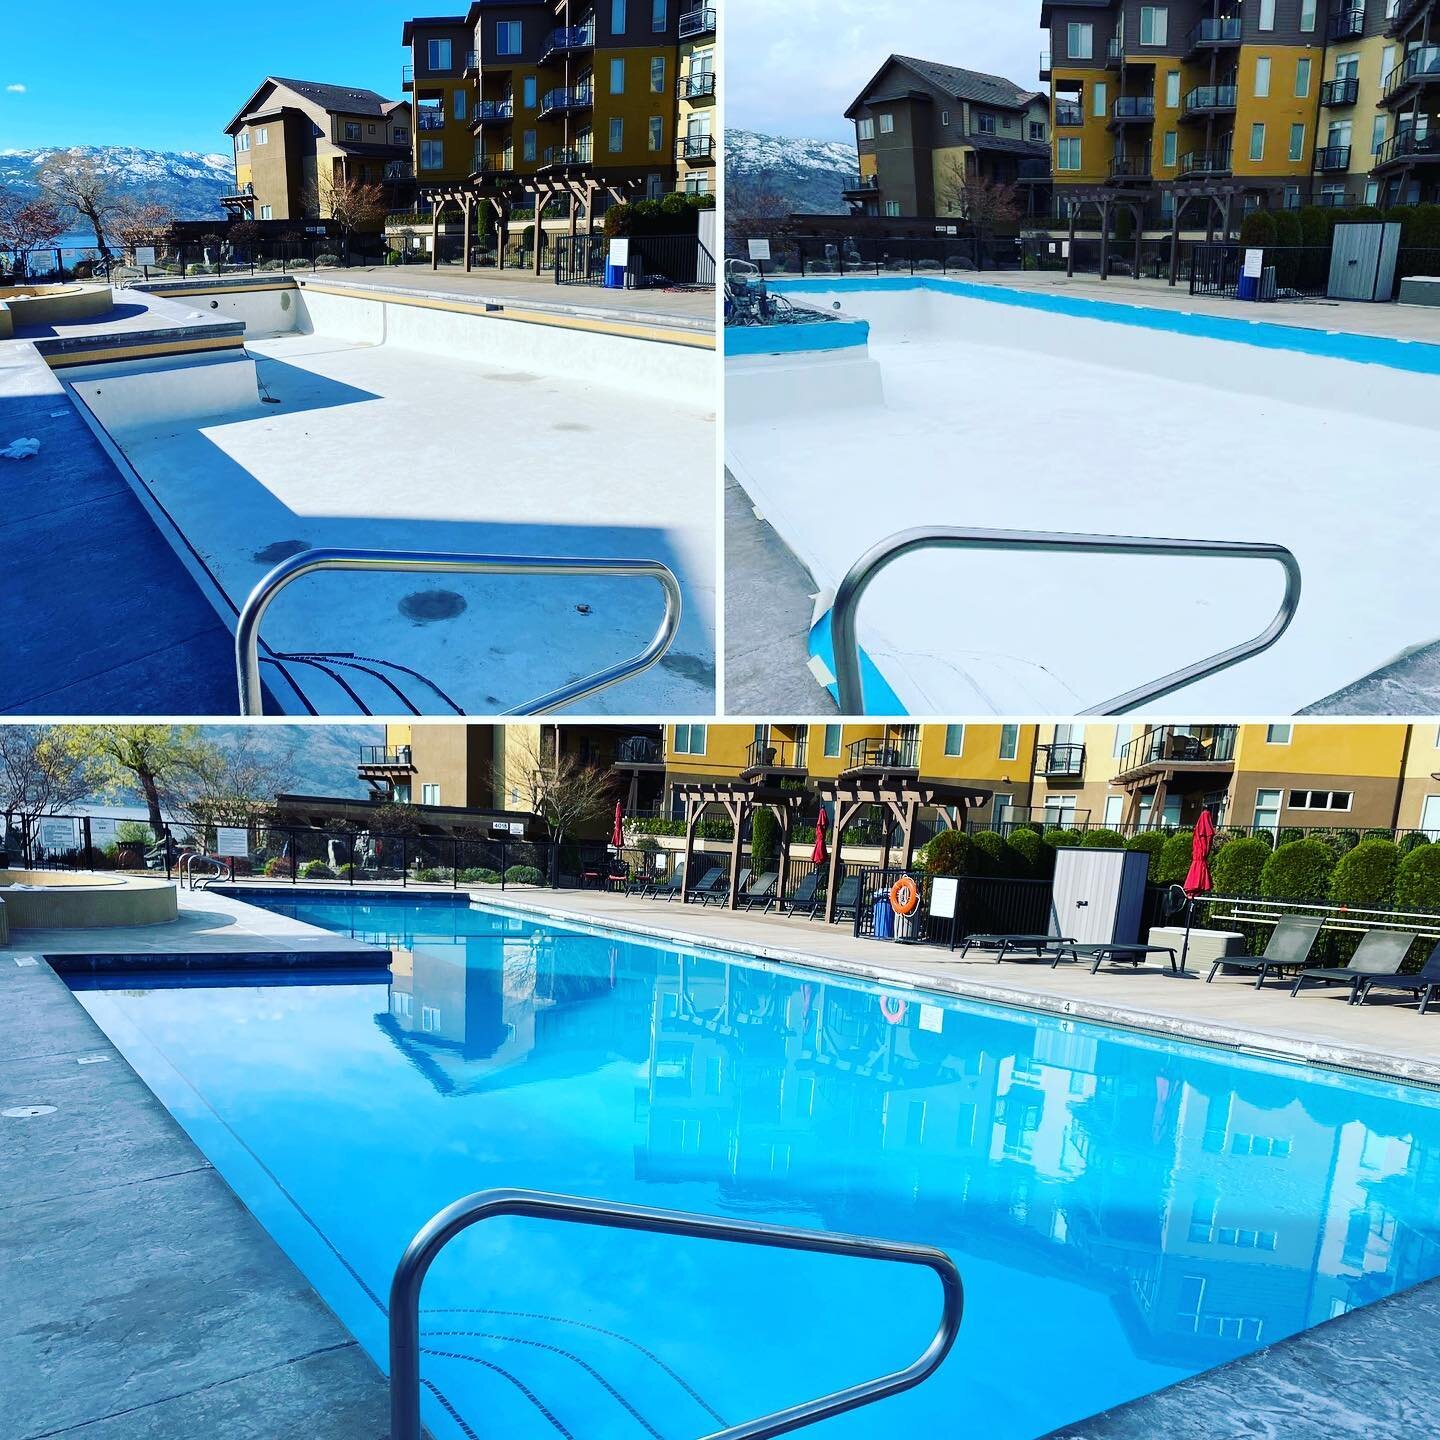 We have been busy preparing for you Spring!

Will and team have been hard at it preparing the Strata&rsquo;s pool for an early opening. It had a full never-before upgrade this year: sandblasted, primed and epoxy finished.

Looks so inviting! 🏊&zwj;♀